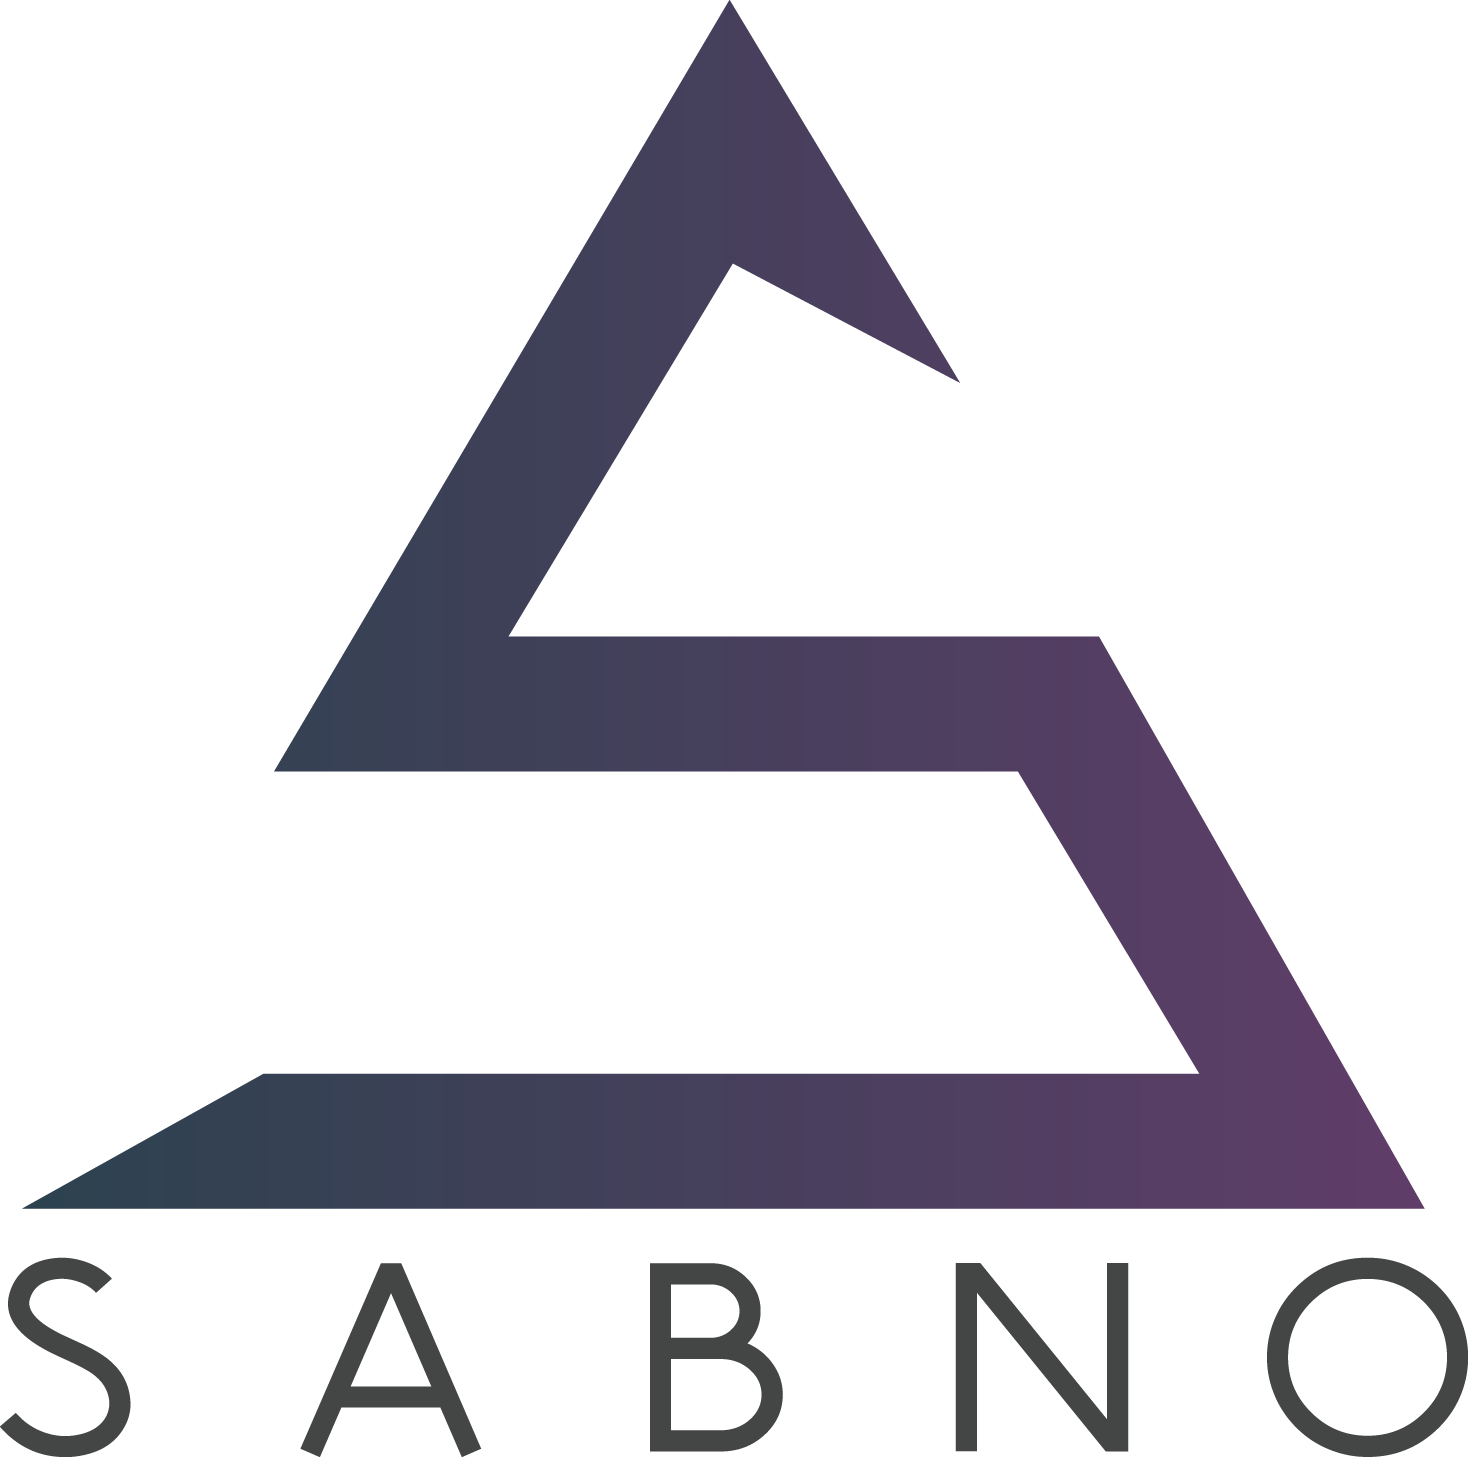 sabno.com is for sale